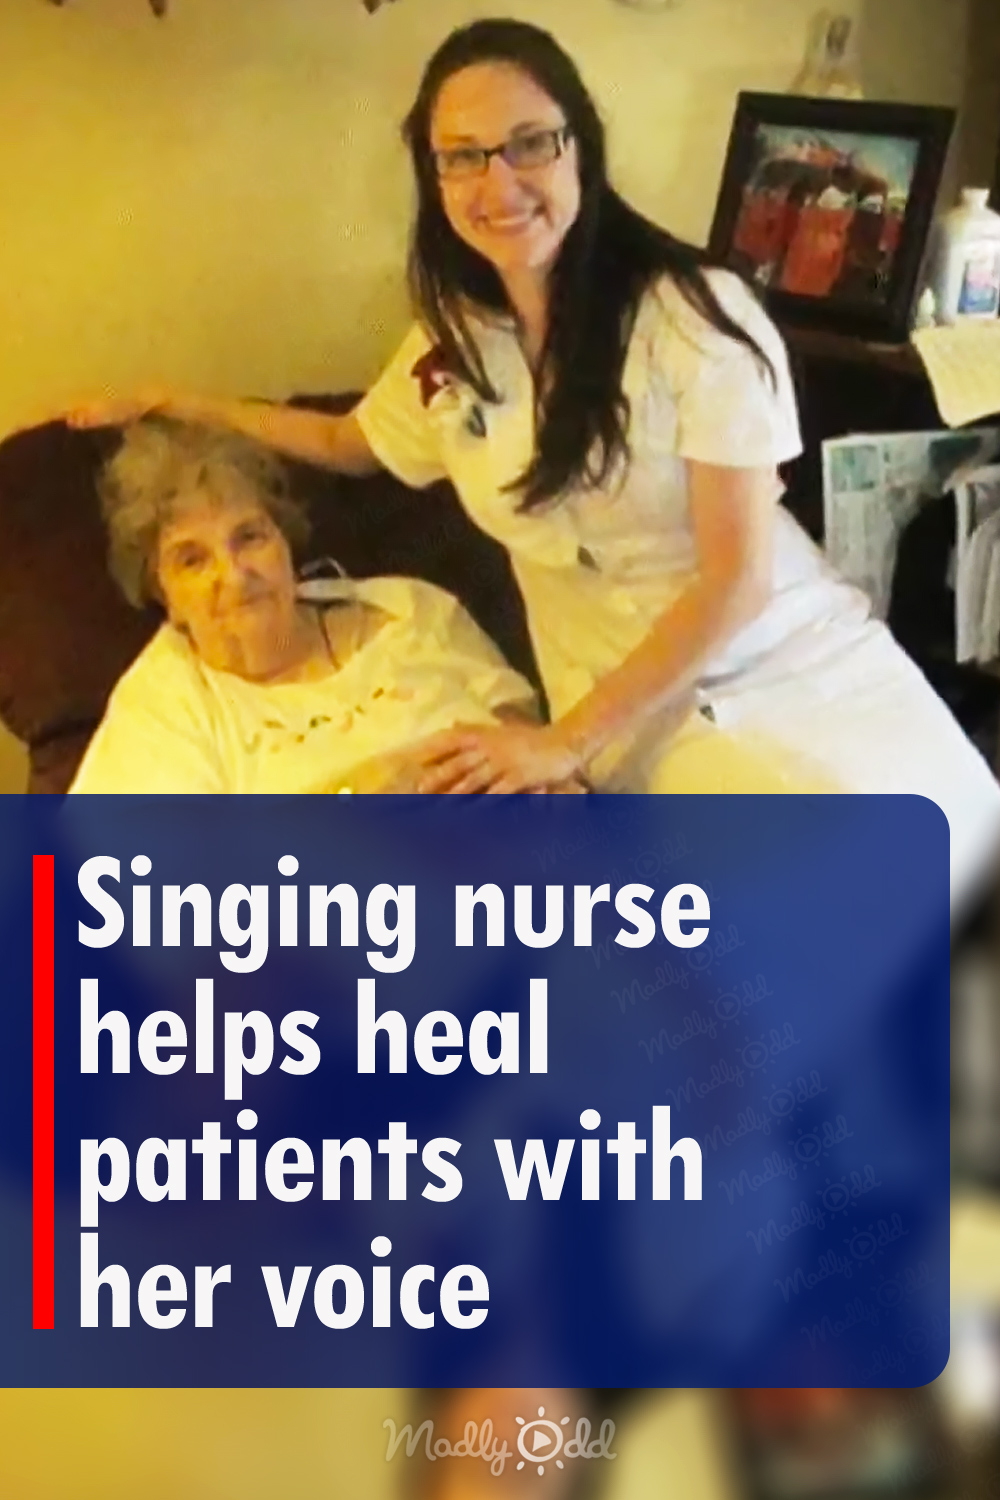 Singing nurse helps heal patients with her voice